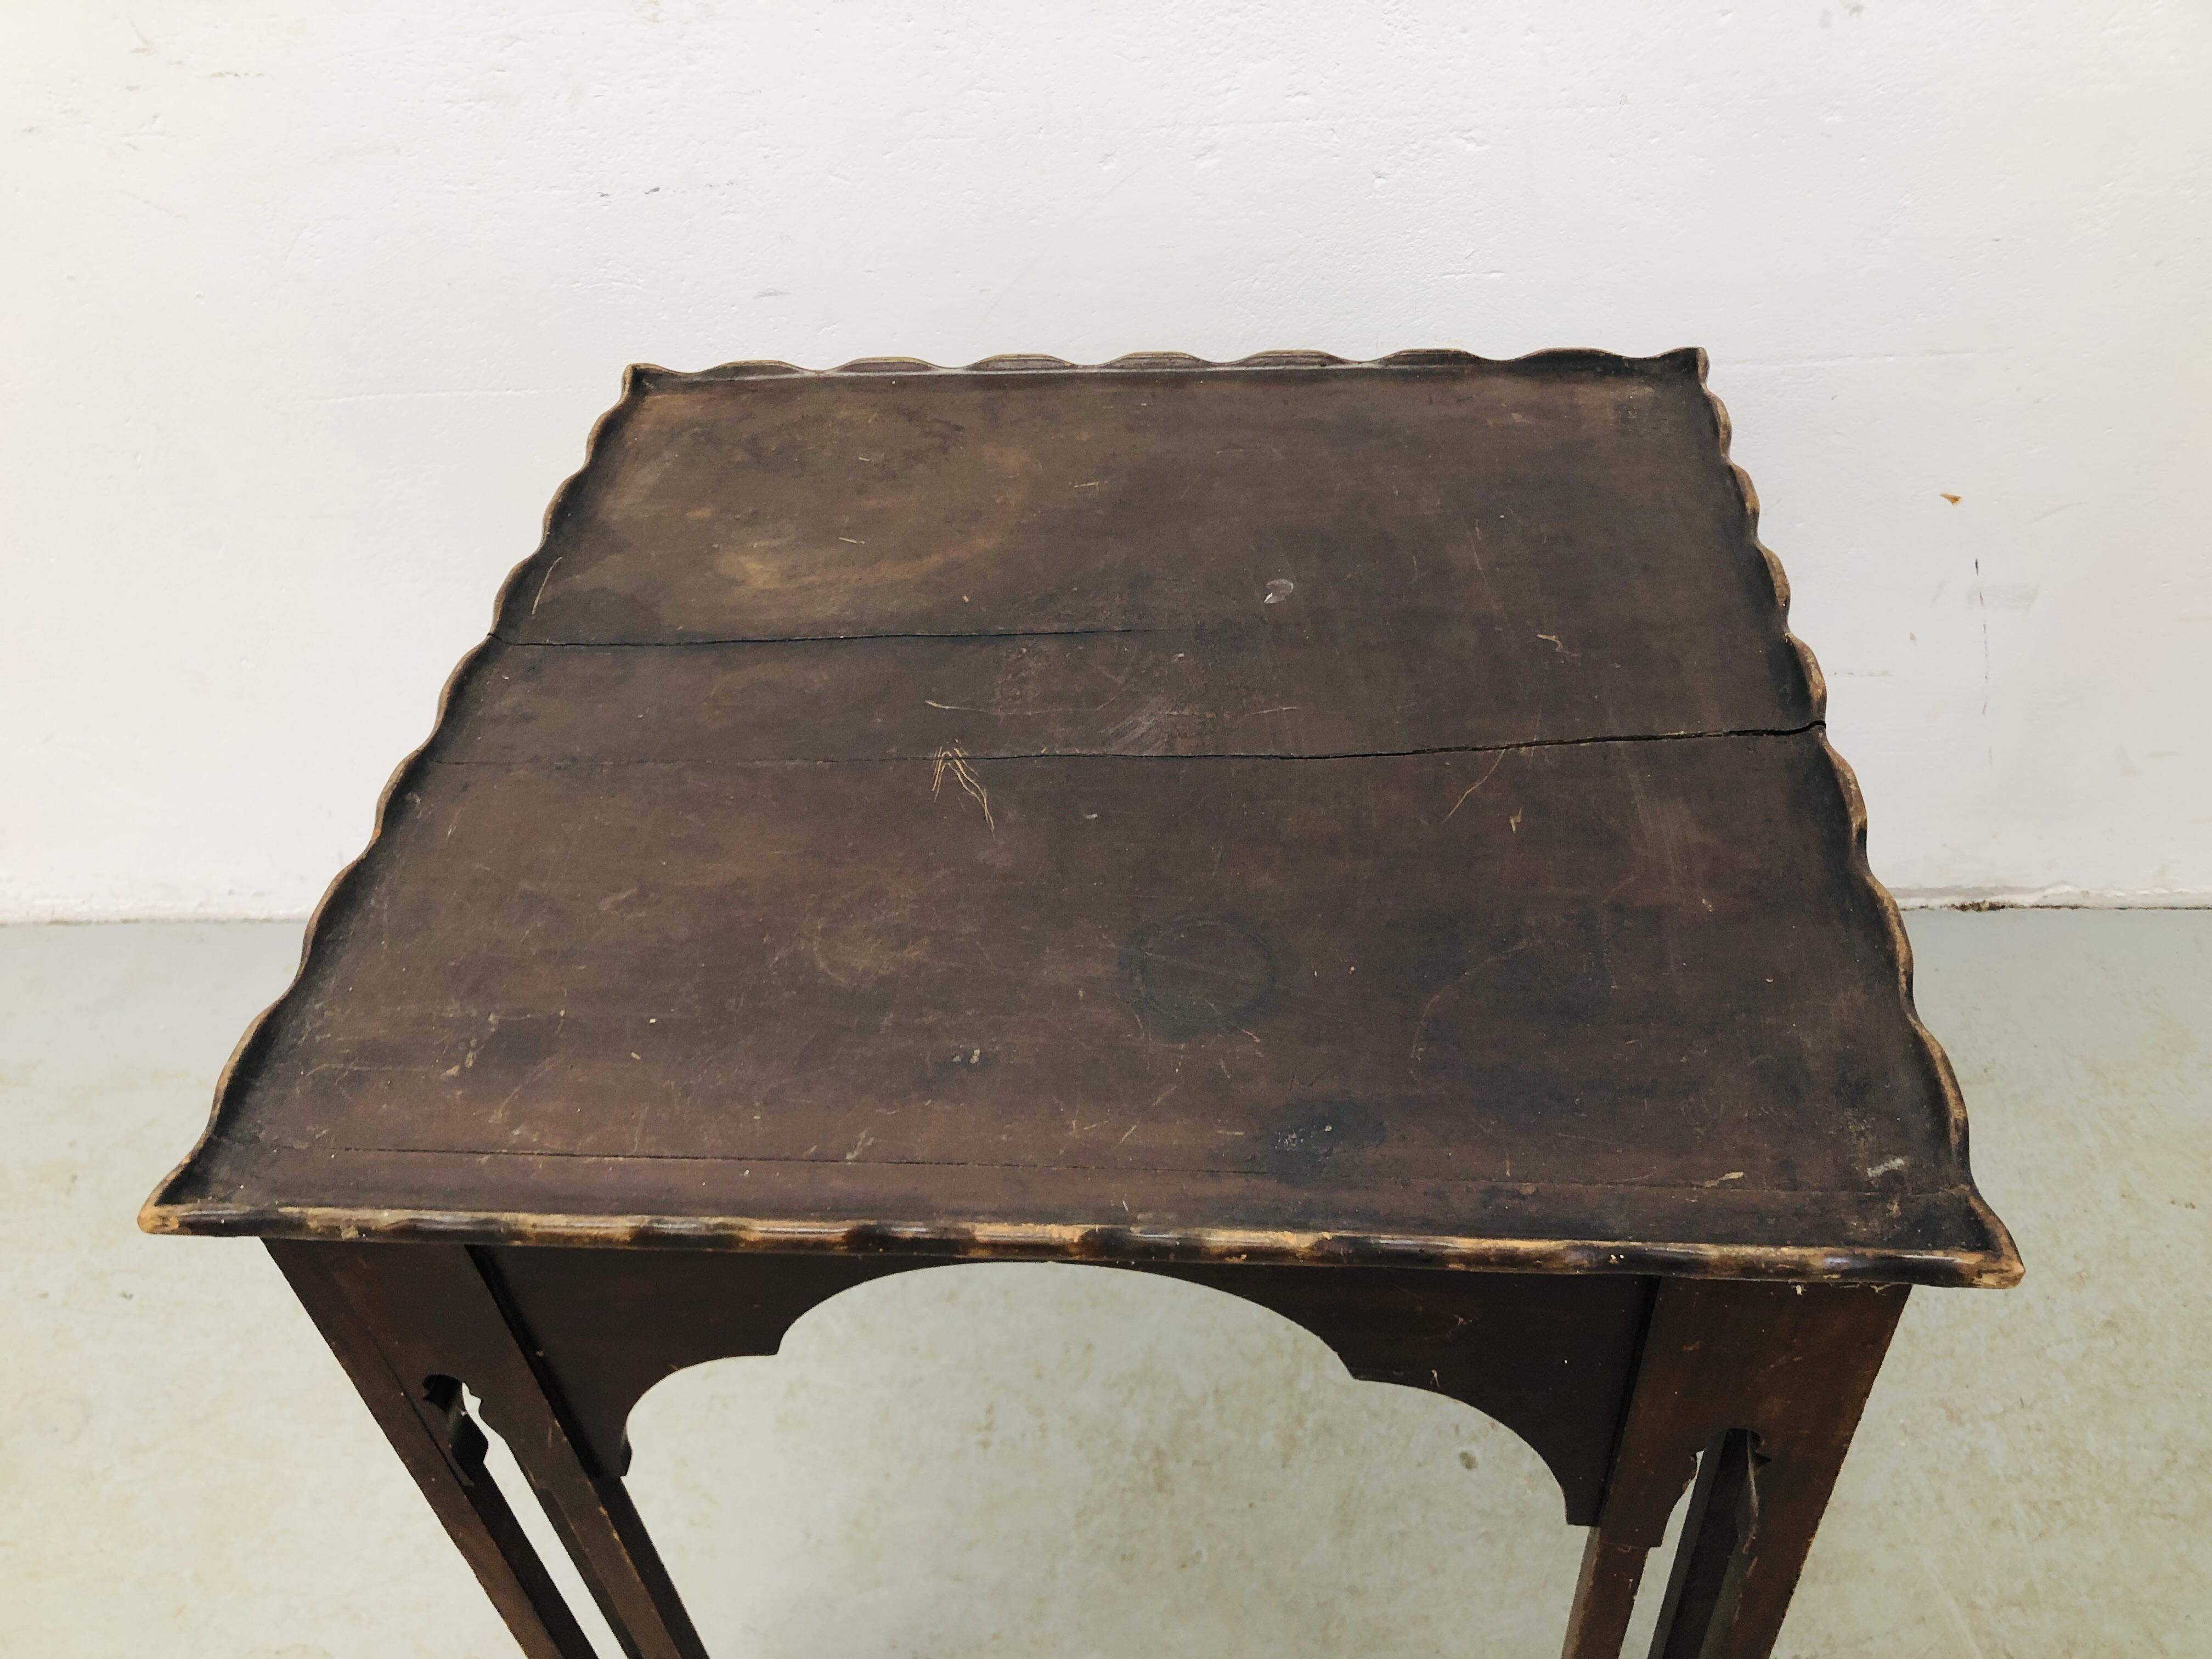 AN ANTIQUE CIRCULAR OCCASIONAL TABLE WITH FRET WORK DETAIL AND GALLERIED SHELF BELOW EACH LEGS - Image 9 of 10